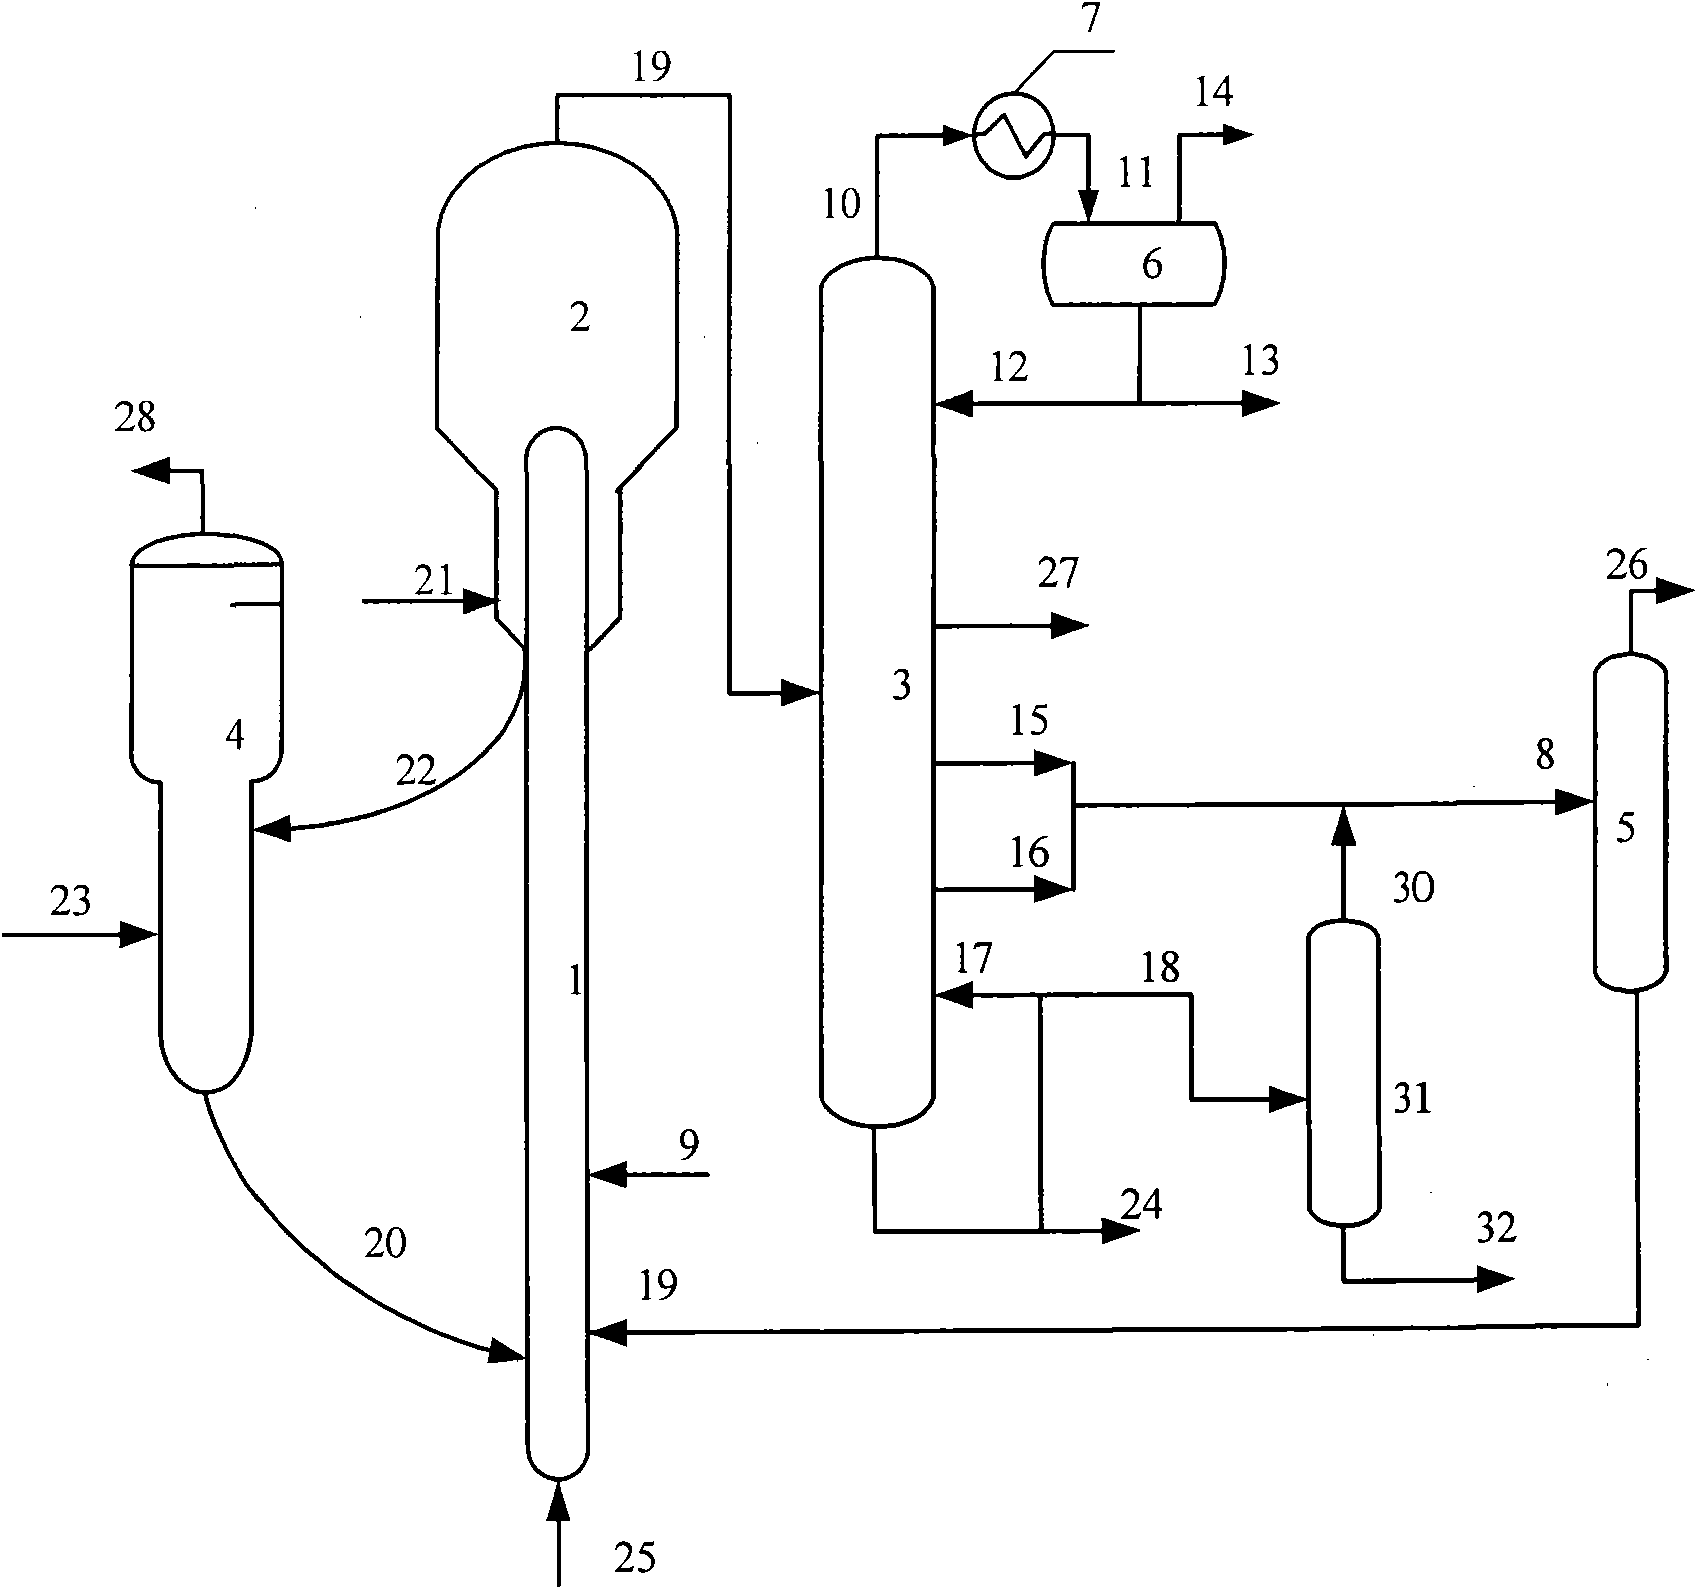 Method for more producing light oil by using hydrocarbon oil